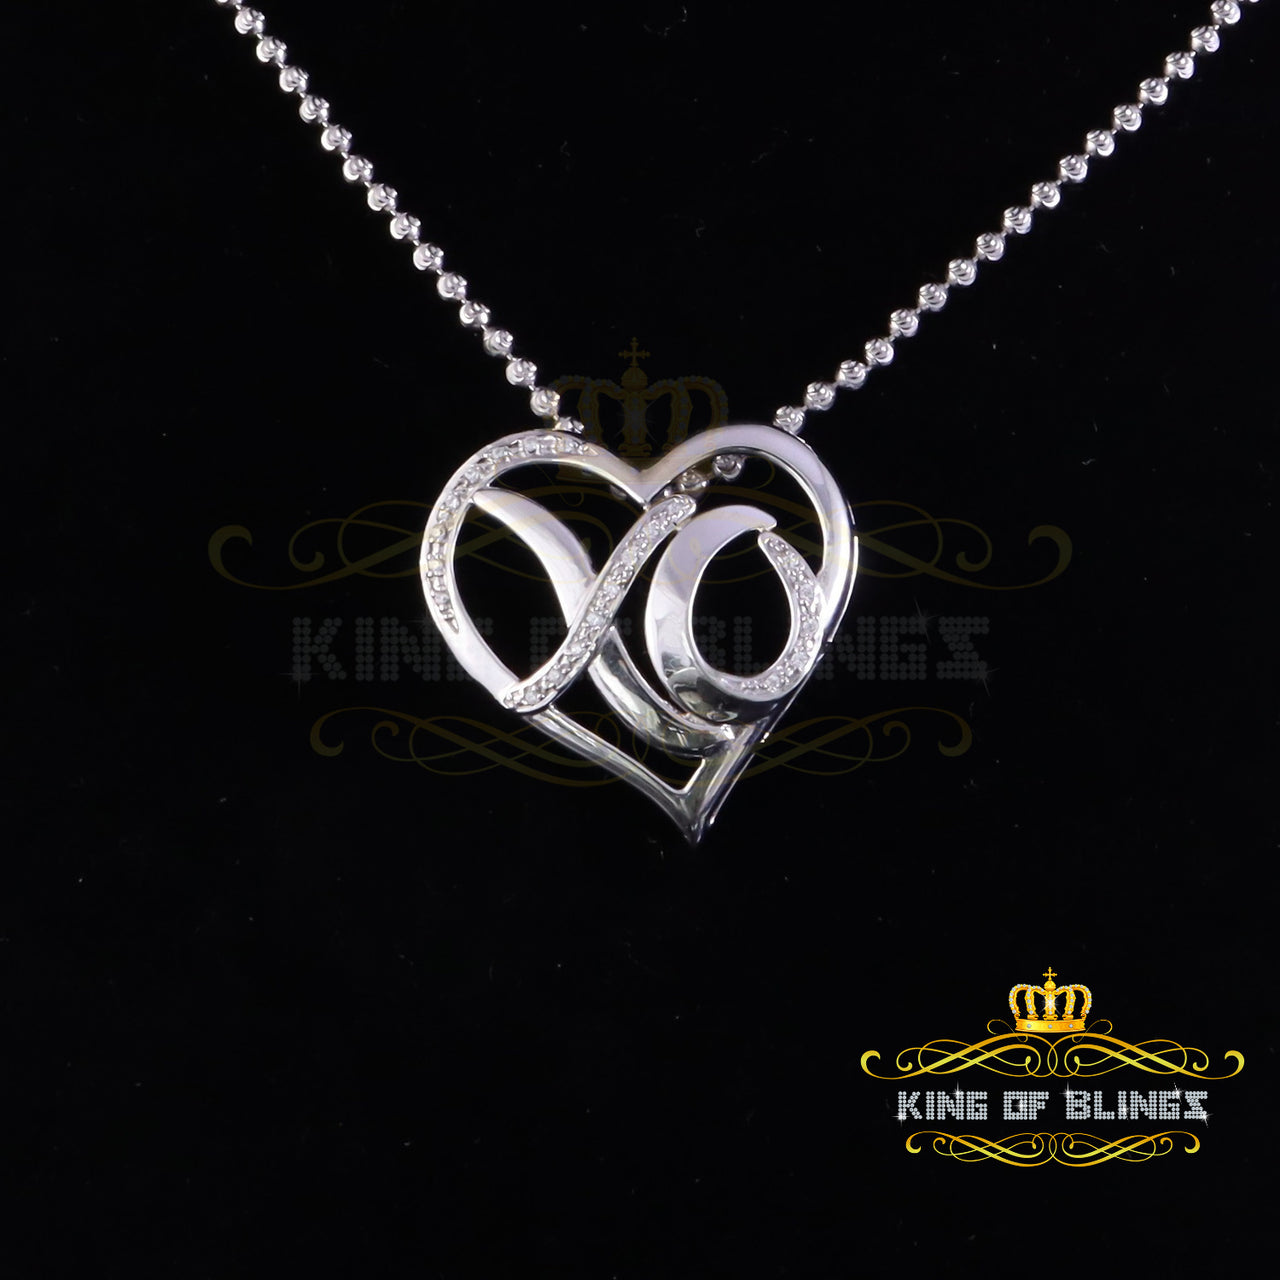 King Of Bling's White 925 Sterling Silver Heart and XO Shape Pendant 0.21ct Cubic Zirconia Stone